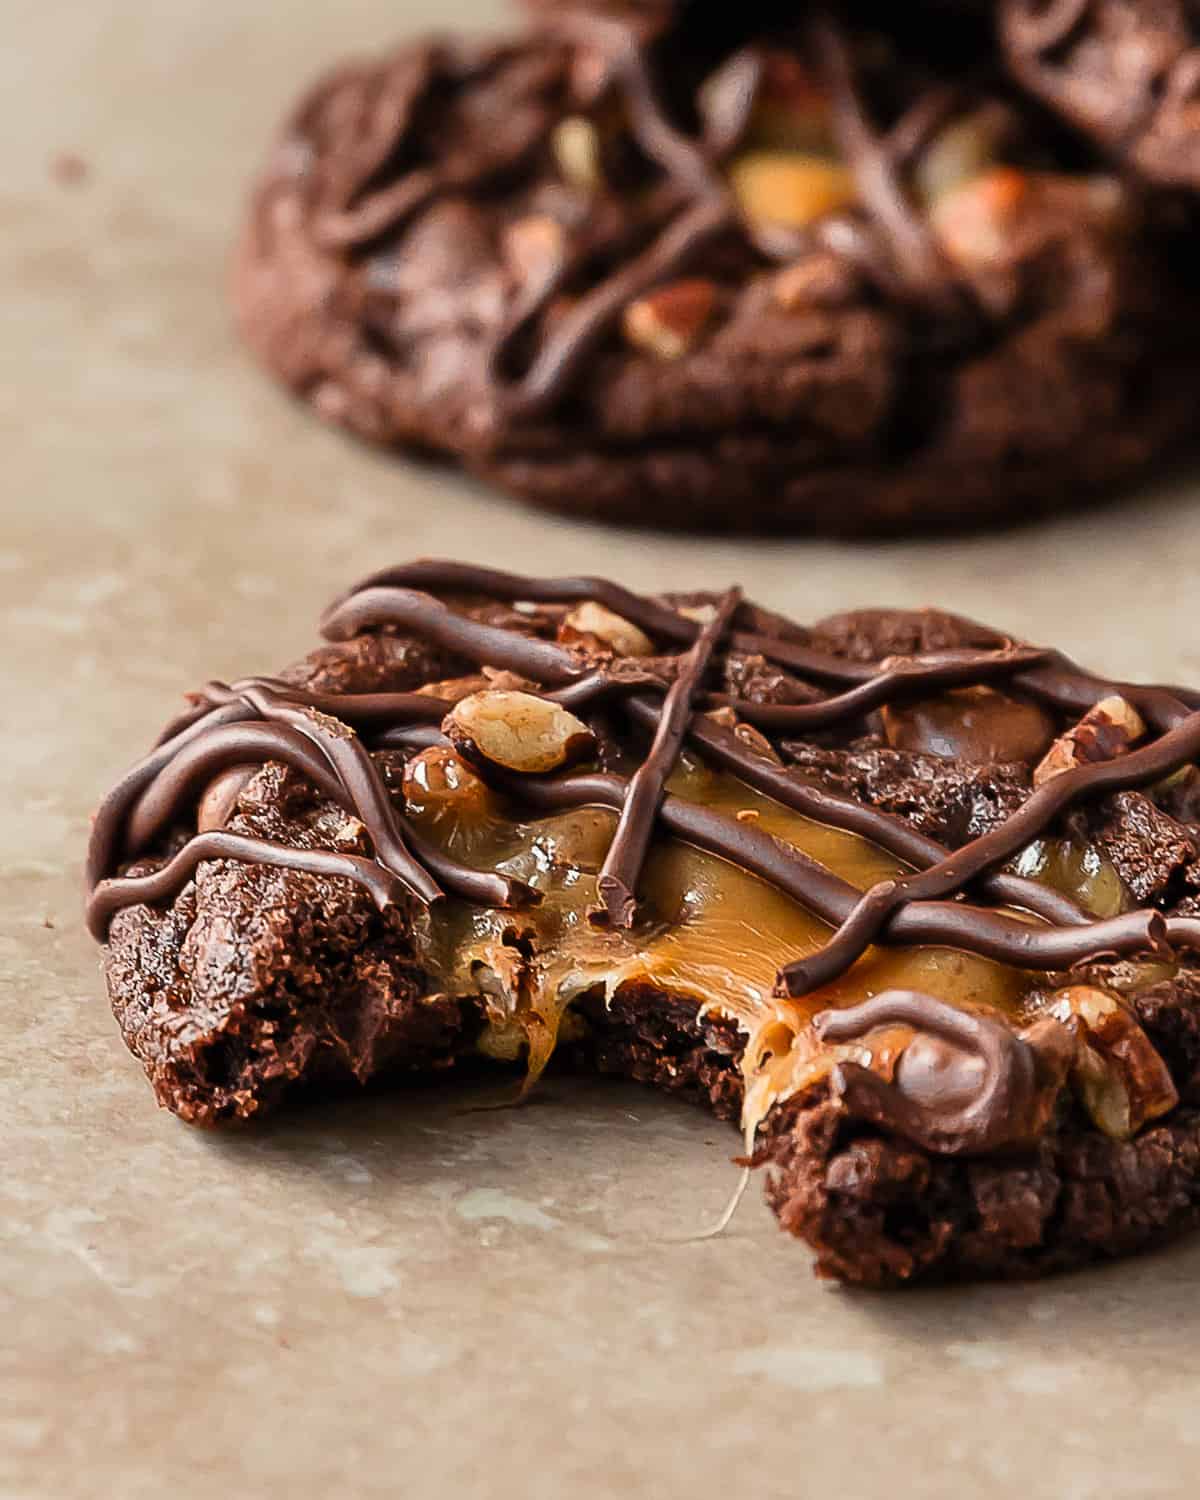 Turtle cookies are soft and chewy chocolate cookies filled with chopped pecans, pockets of melted caramel and gooey chocolate chips. These pecan turtle cookies are topped with more caramel and a drizzle of melted chocolate. Delight everyone with a batch of these easy to make chocolate caramel pecan cookies. 